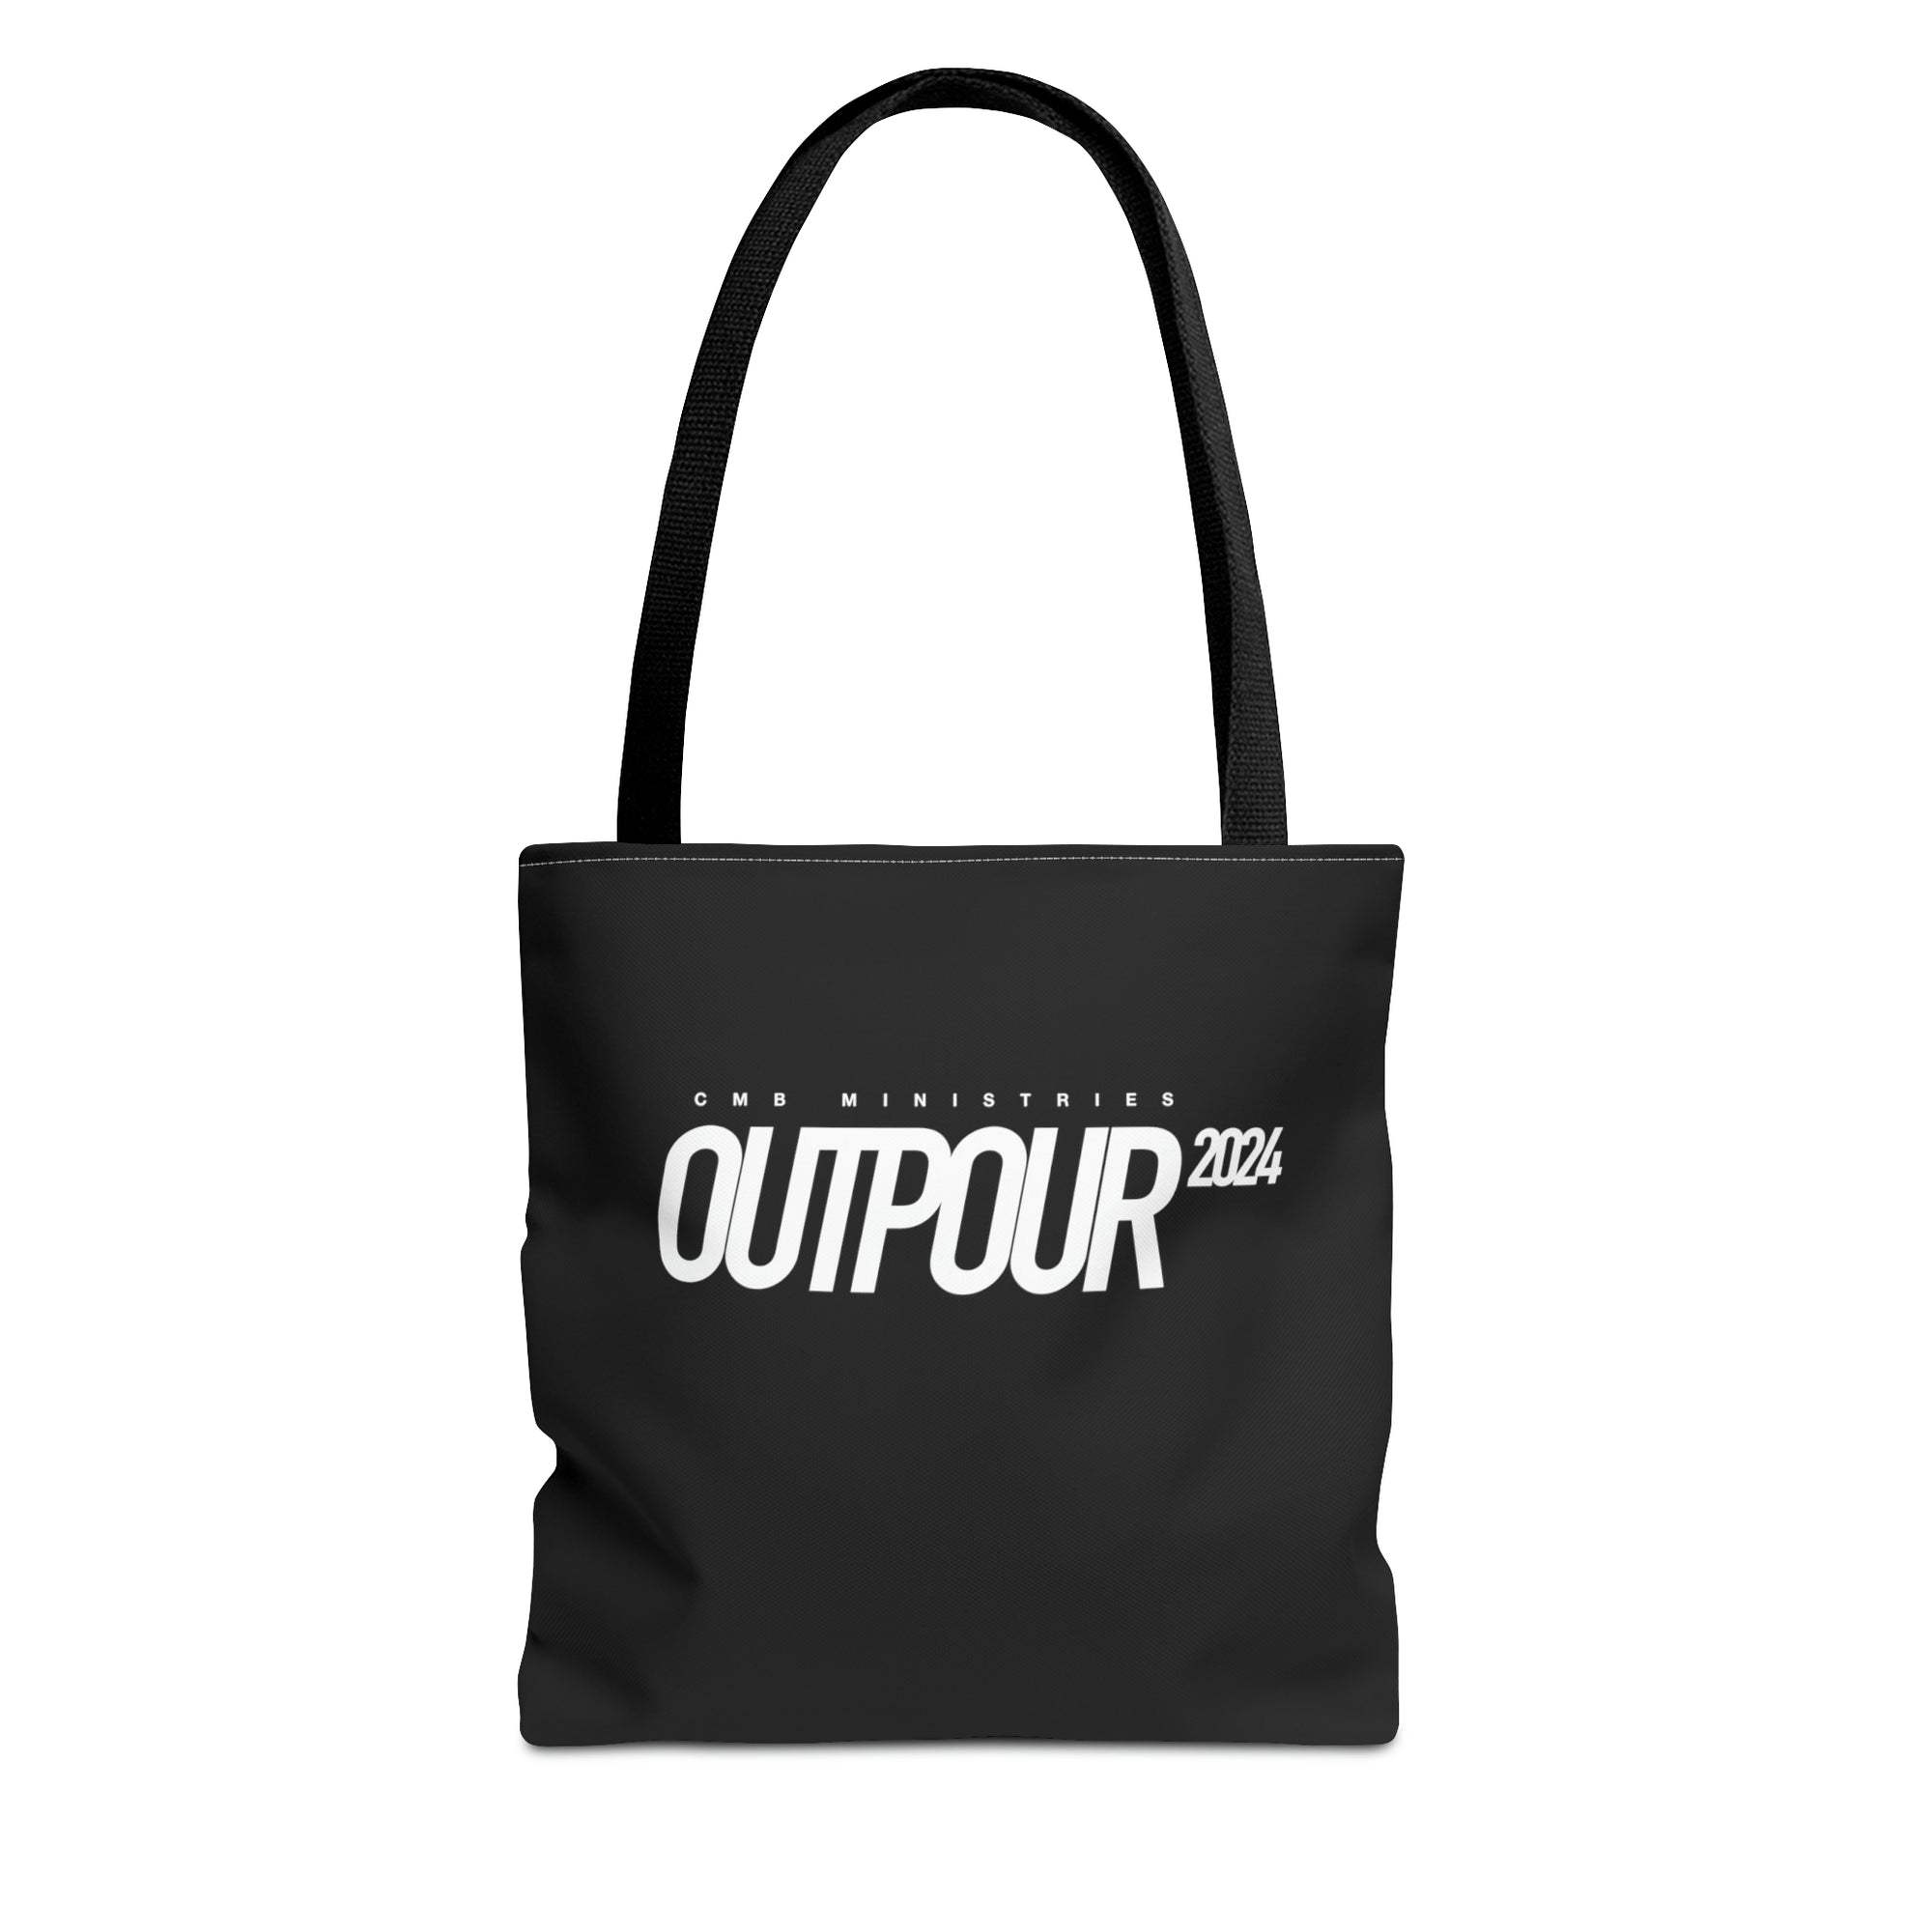 Outpour 2024 - Tote Bag